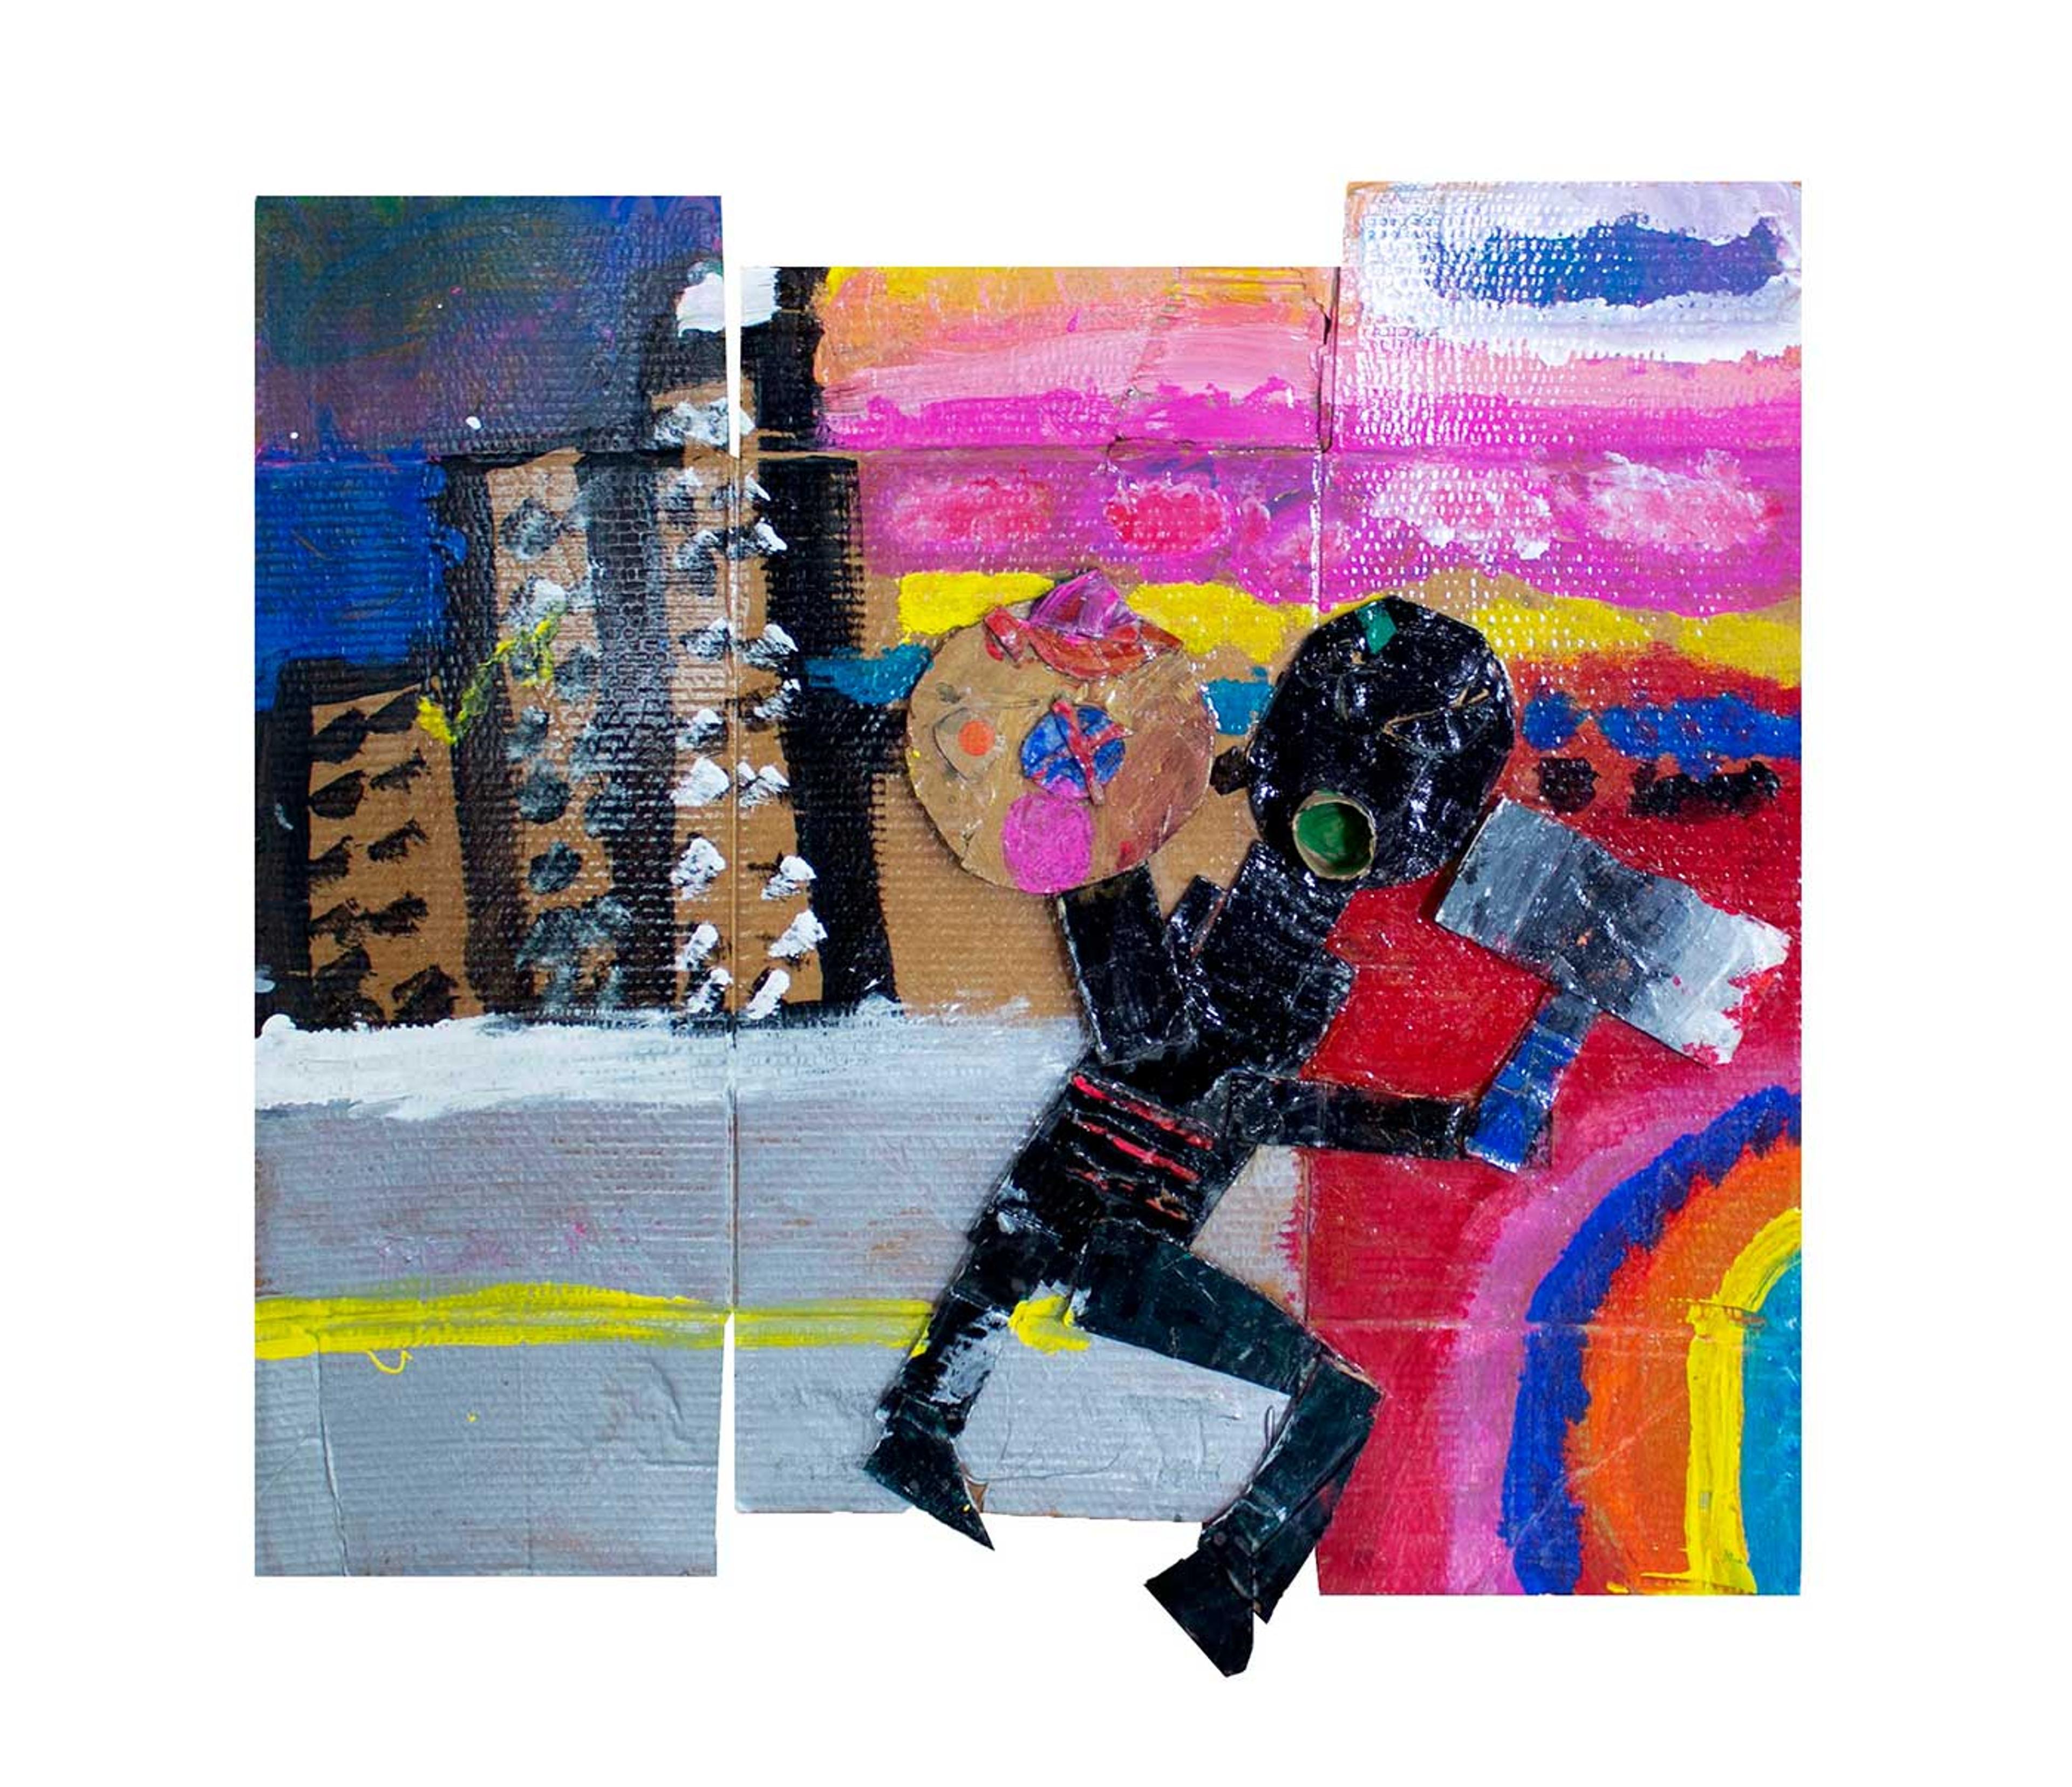 Collage of a super hero running through a city with a rainbow background.